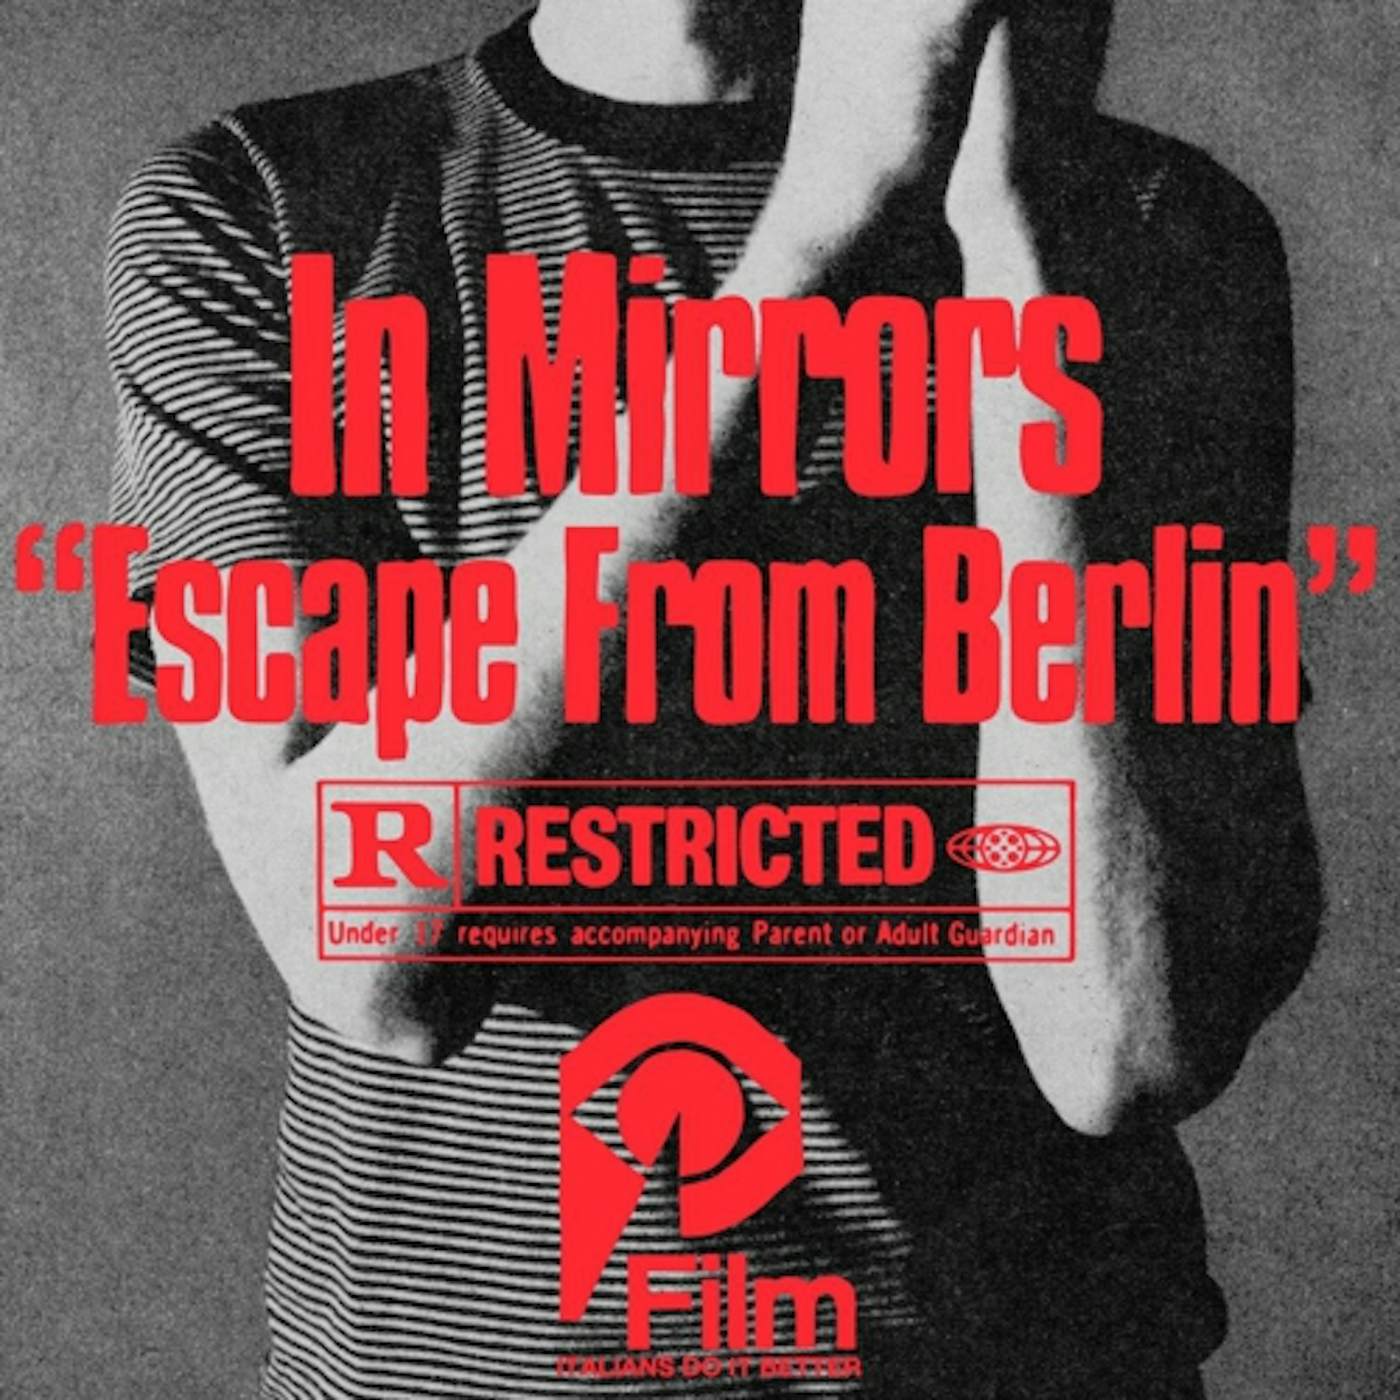 In Mirrors ESCAPE FROM BERLIN CD